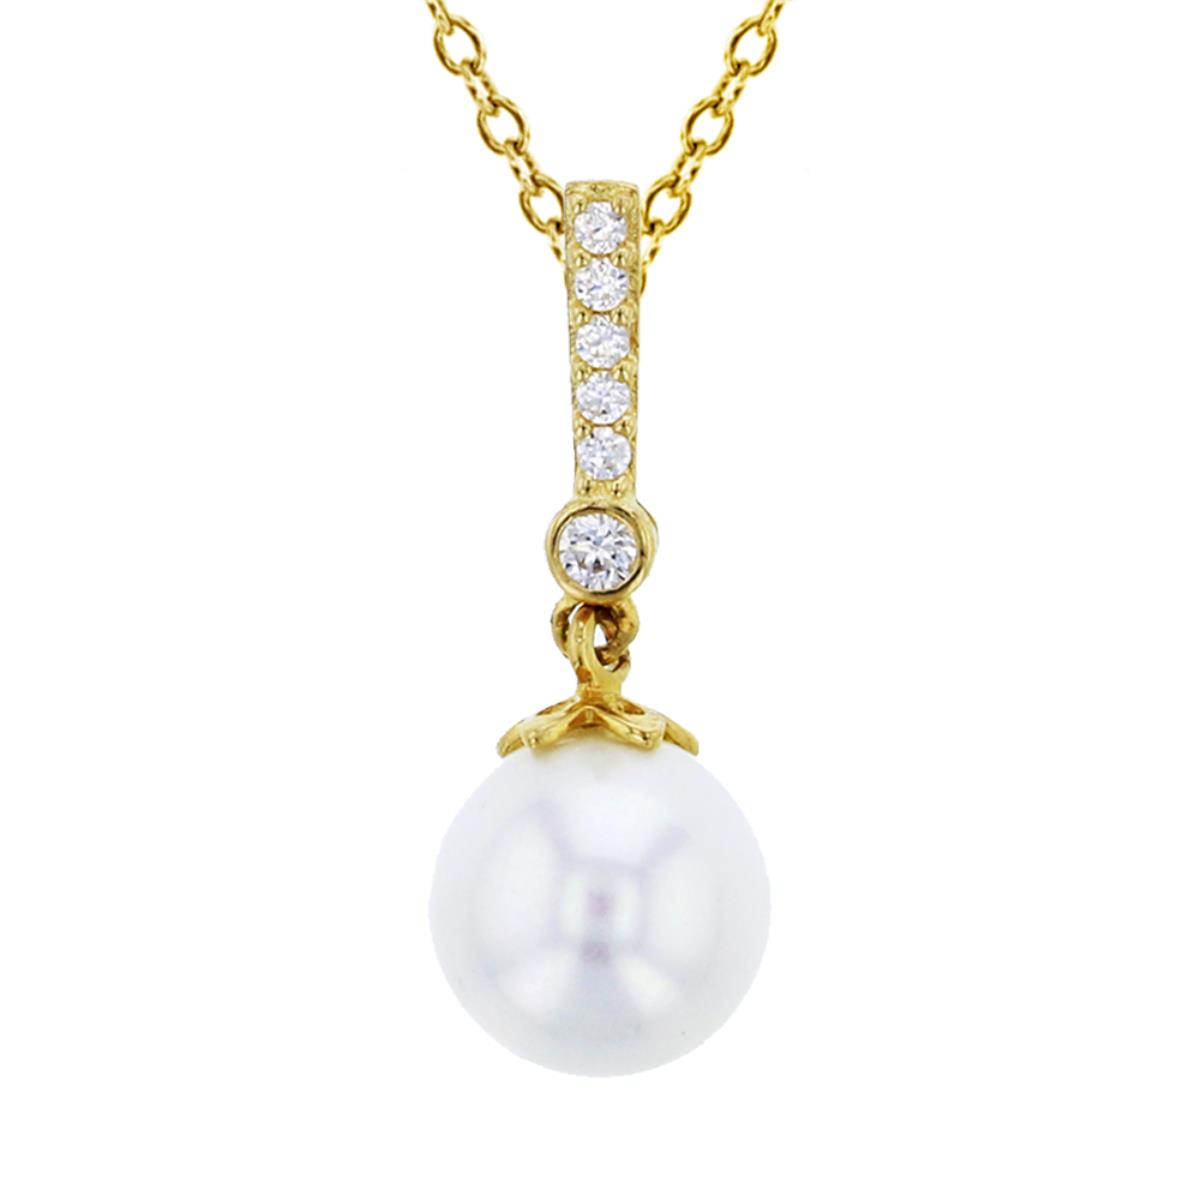 10K Yellow Gold 6mm Fresh Water Pearl & CZ Dangling 18" Necklace